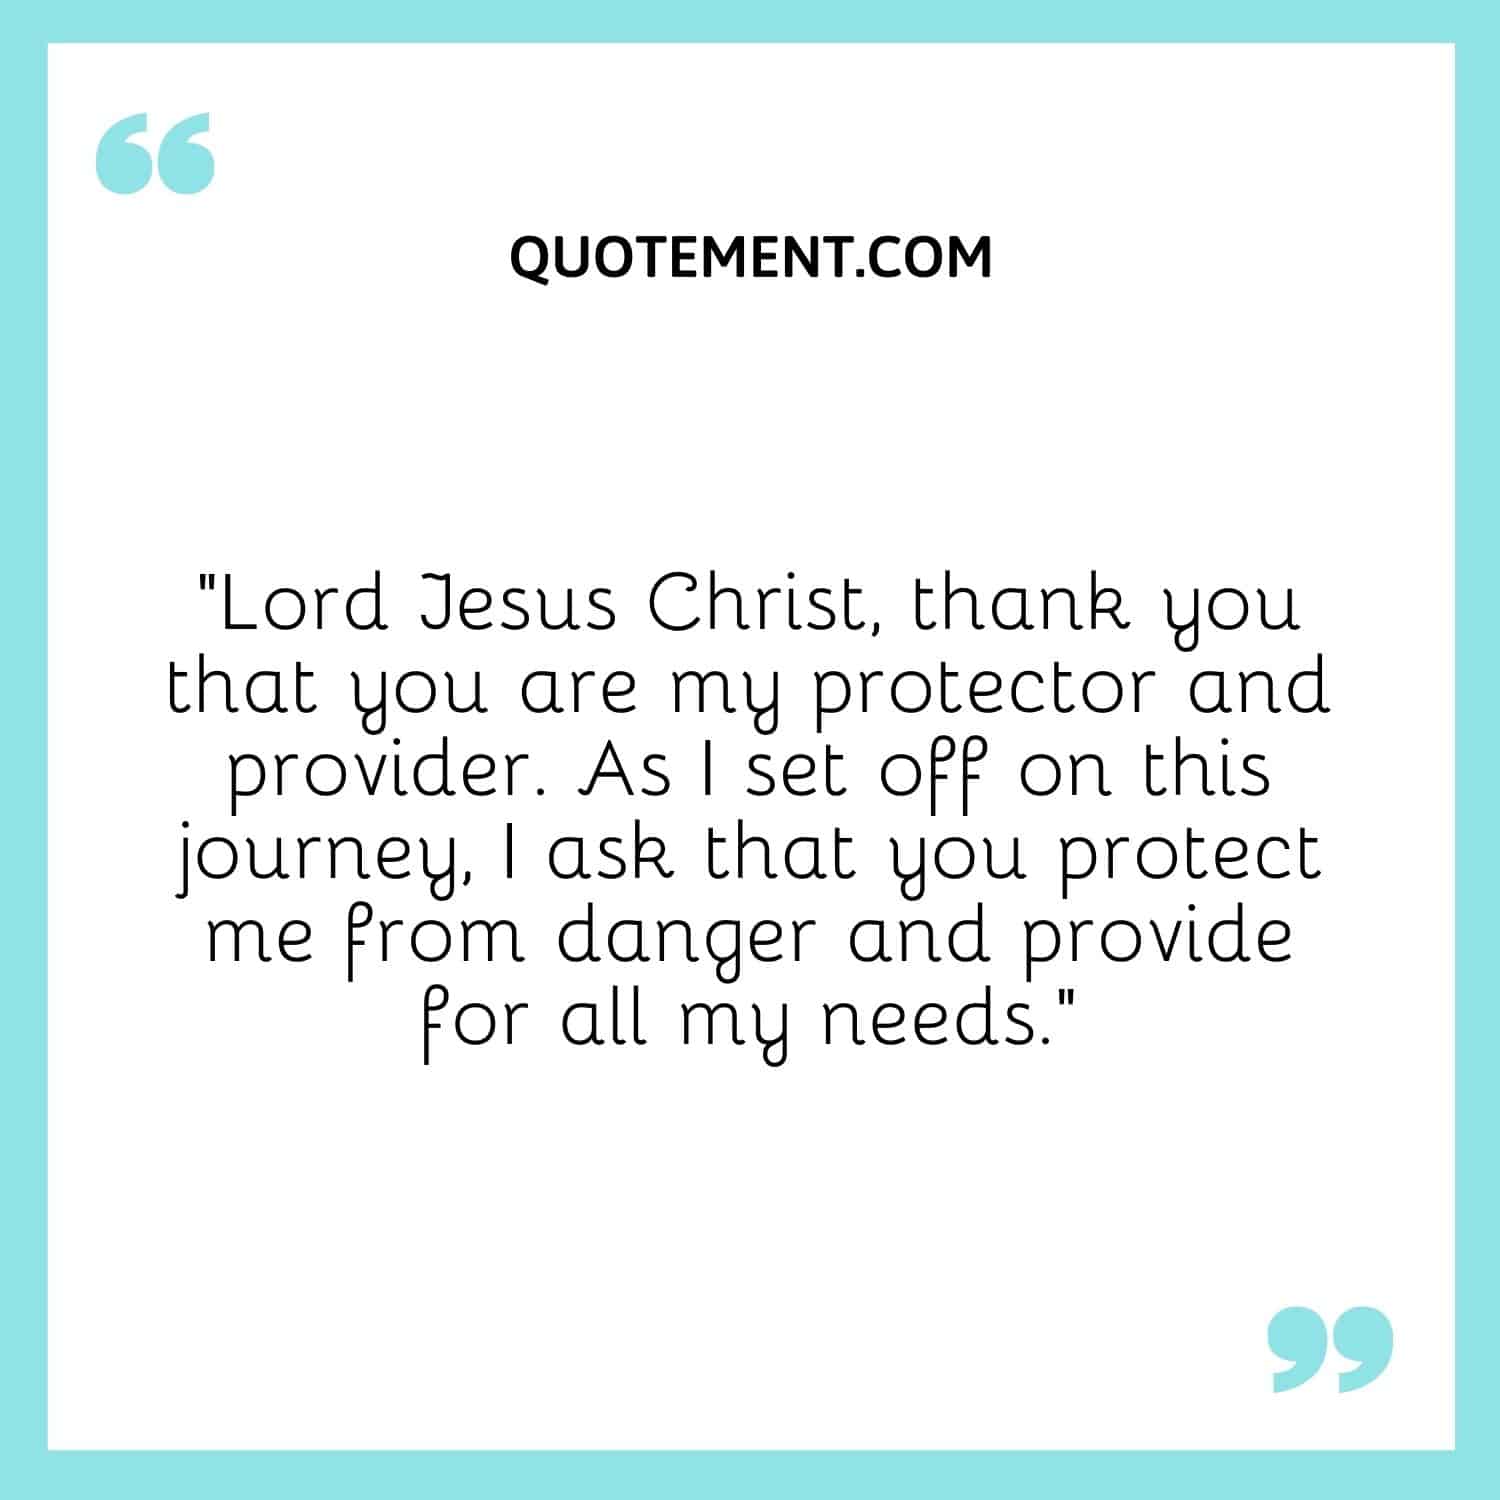 “Lord Jesus Christ, thank you that you are my protector and provider.”